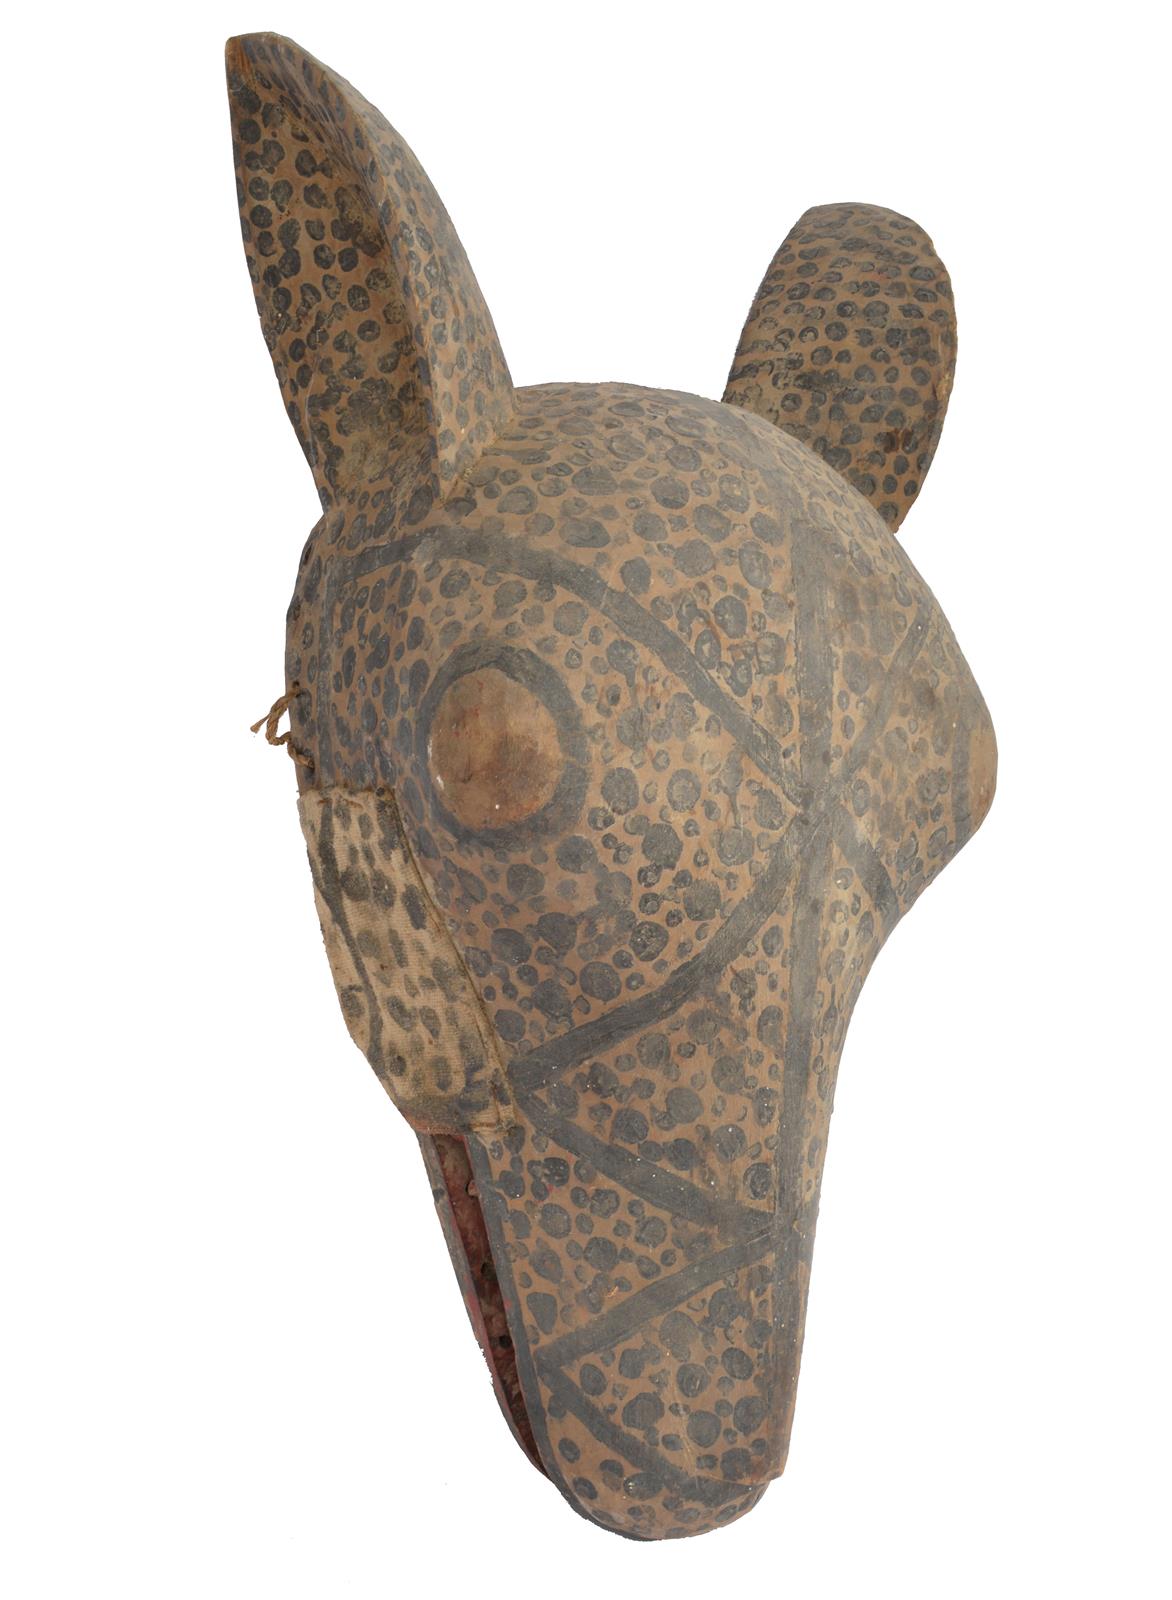 A West African leopard mask probably Cameroon with an articulated jaw, cloth, fibre and painted